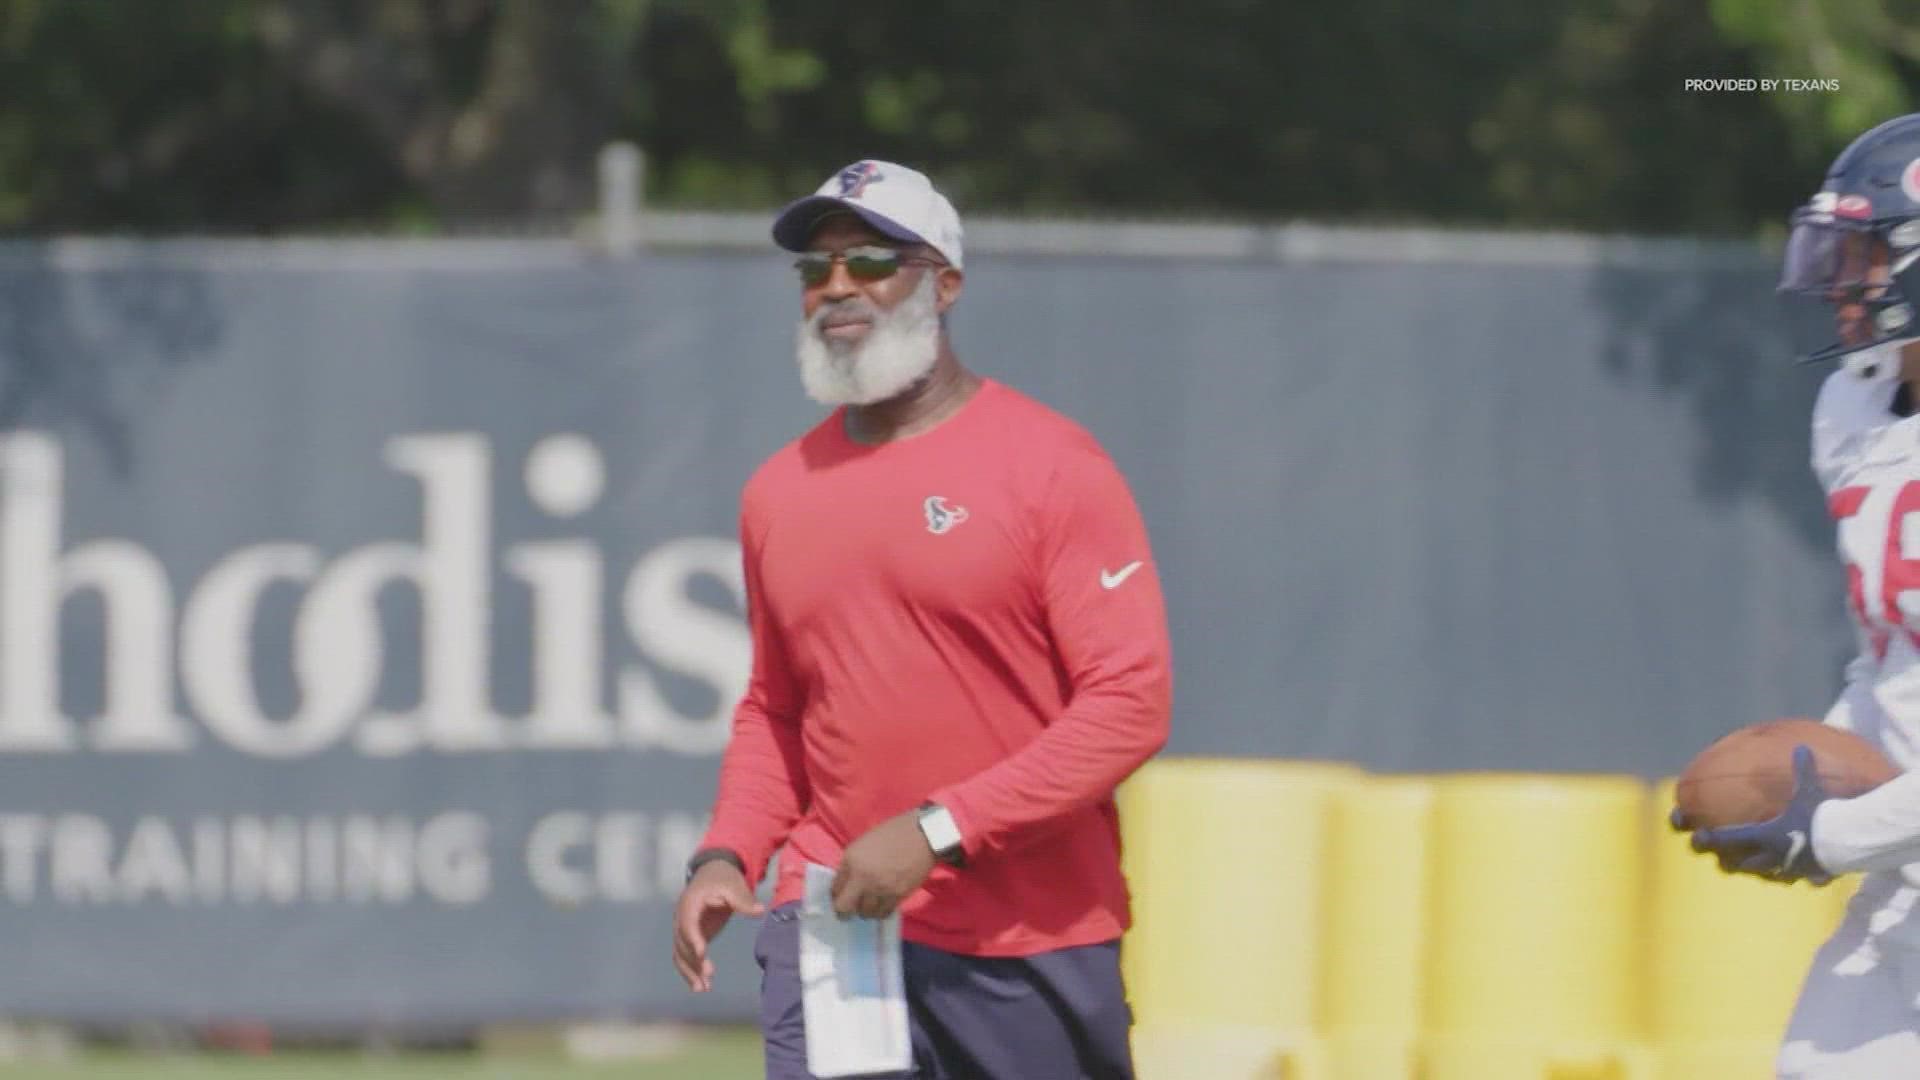 While he's been a familiar figure on the Texans' sidelines, his hiring has come as a surprise.